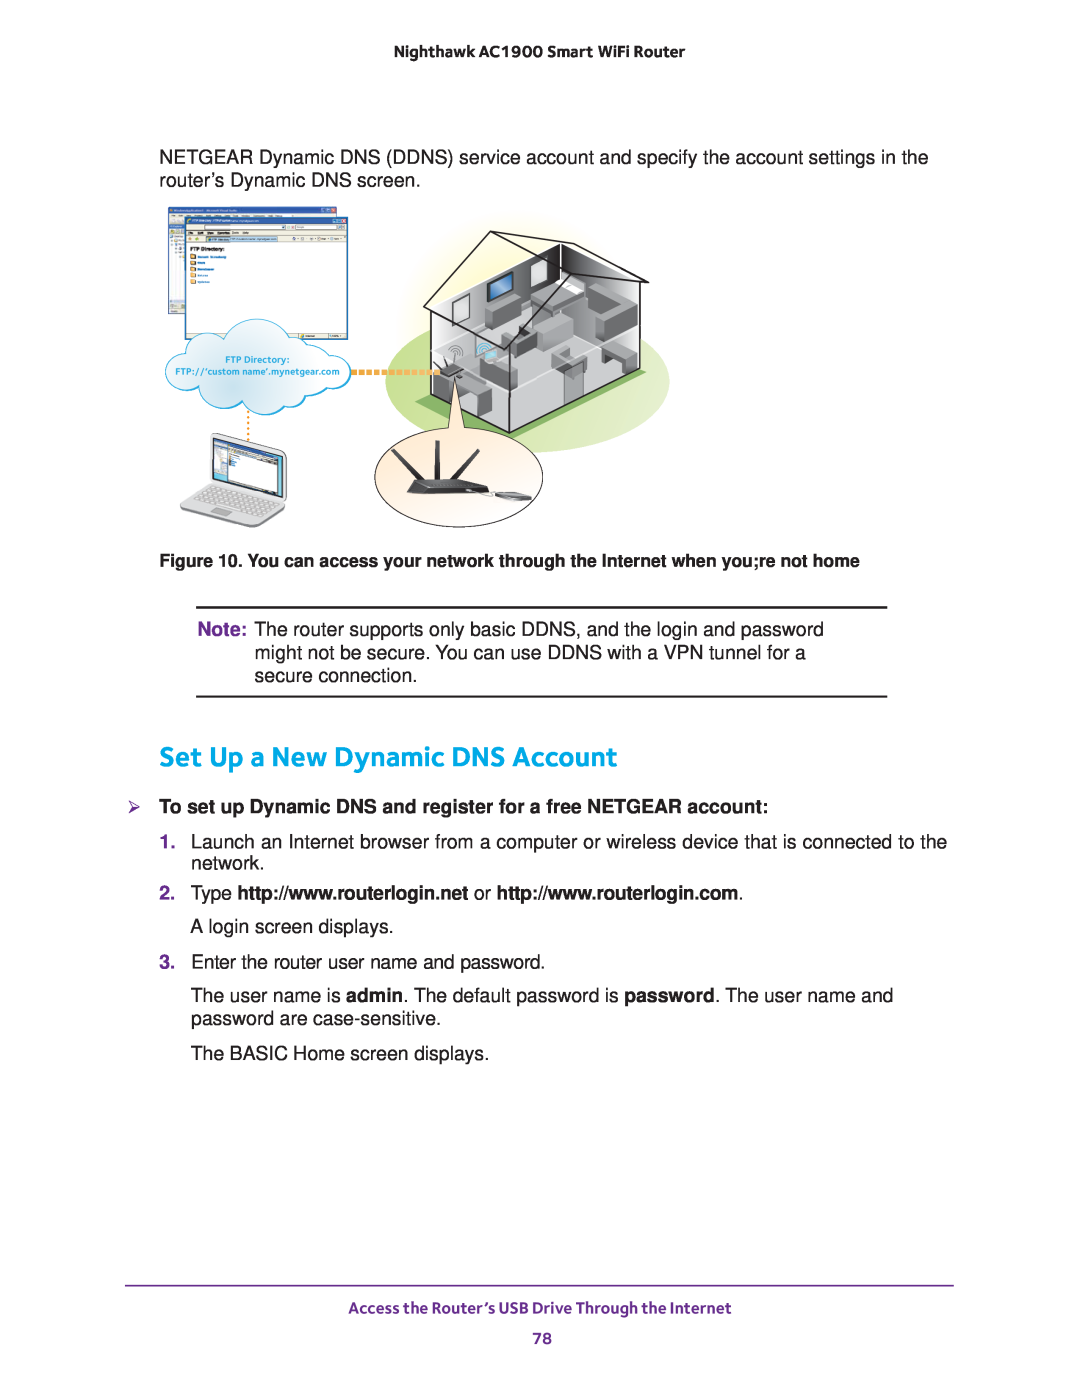 NETGEAR Model R7000 Set Up a New Dynamic DNS Account,  To set up Dynamic DNS and register for a free NETGEAR account 